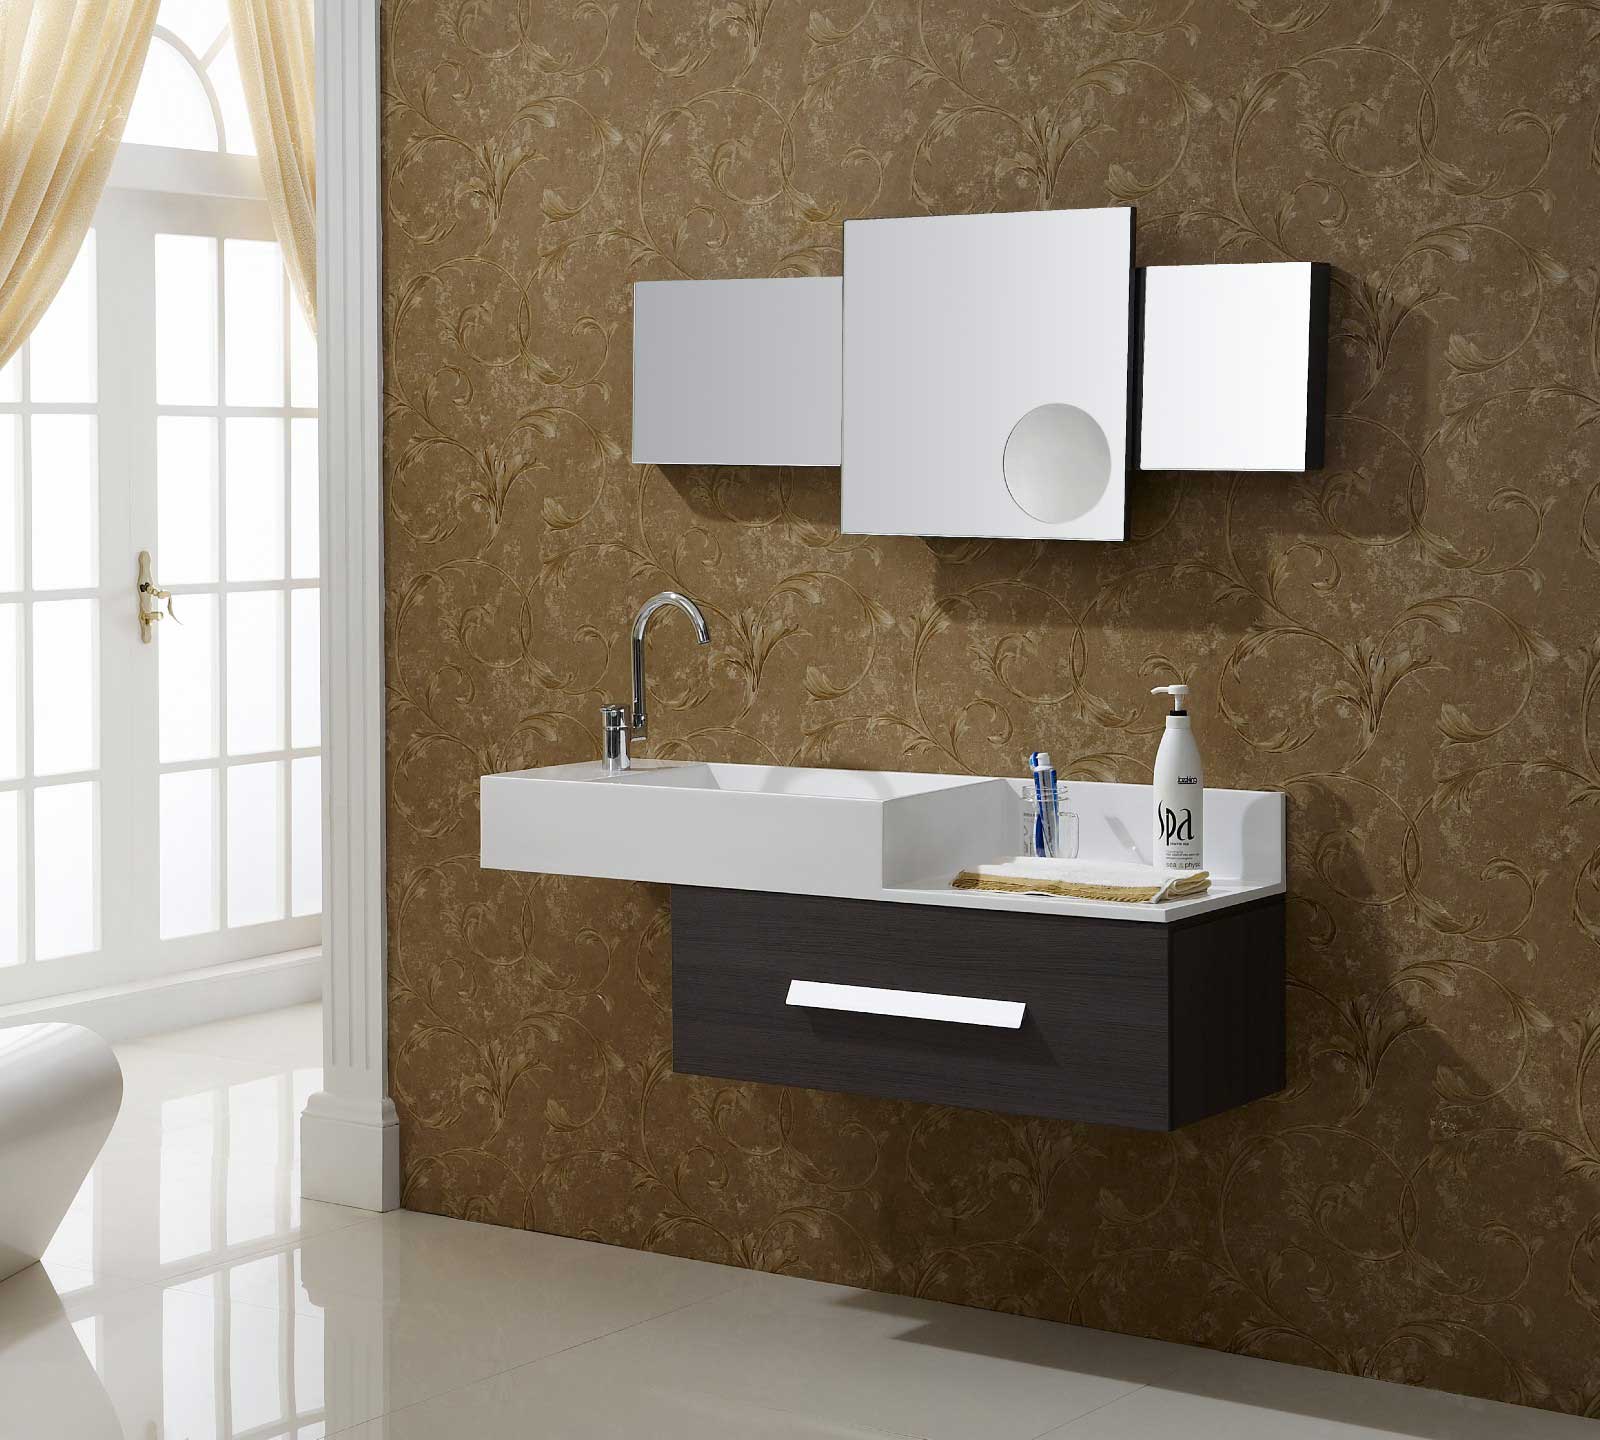 Modern Bathroom Wooden Minimalist Modern Bathroom Vanities Using Wooden Material And White Wash Basin Completed With Small Wall Mirror Ideas Bathroom Modern Bathroom Vanities As Amusing Interior For Futuristic Home